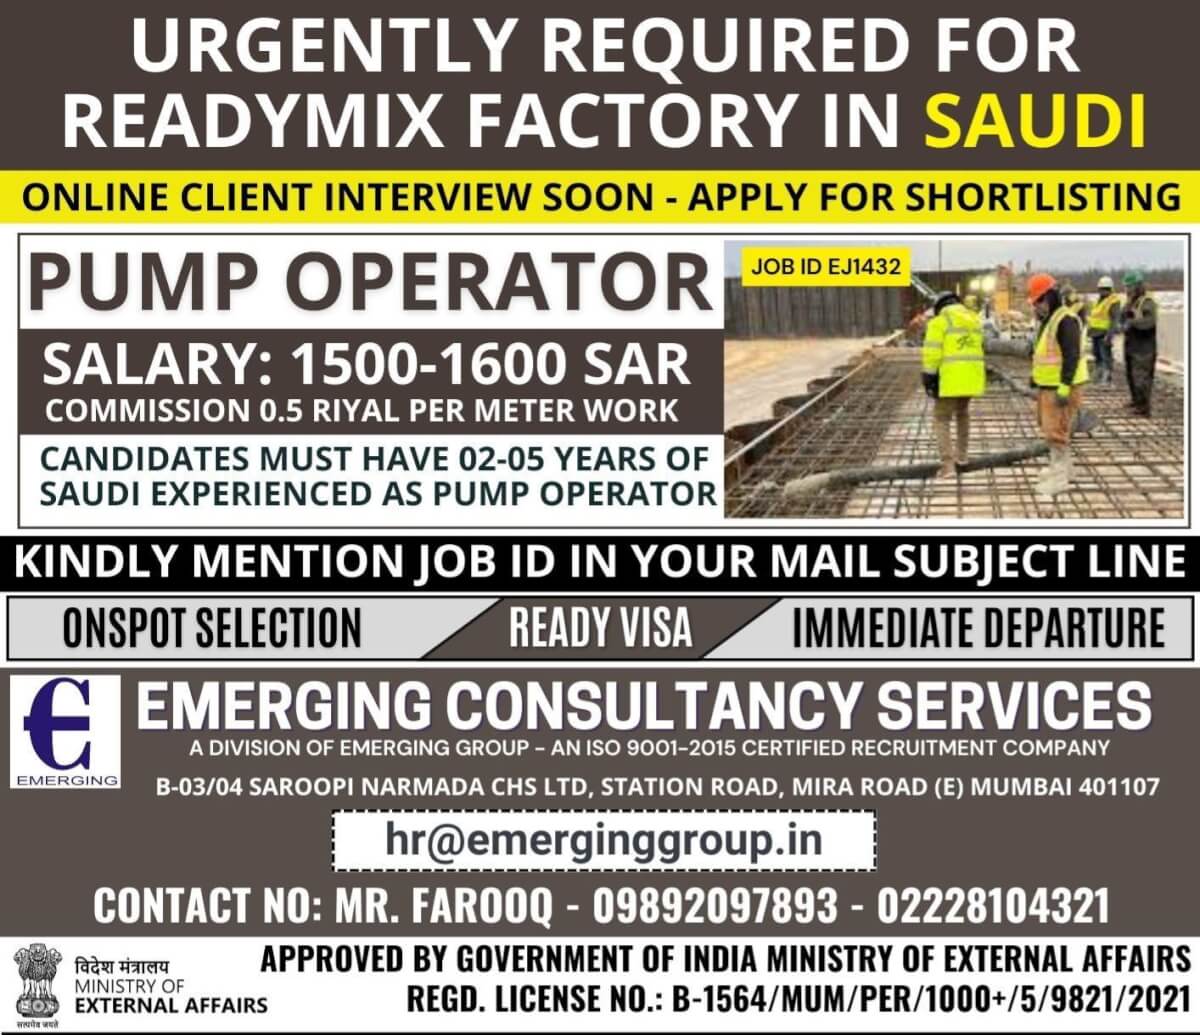 URGENTLY REQUIRED FOR READYMIX FACTORY IN SAUDI ARABIA - SHORTLISTING